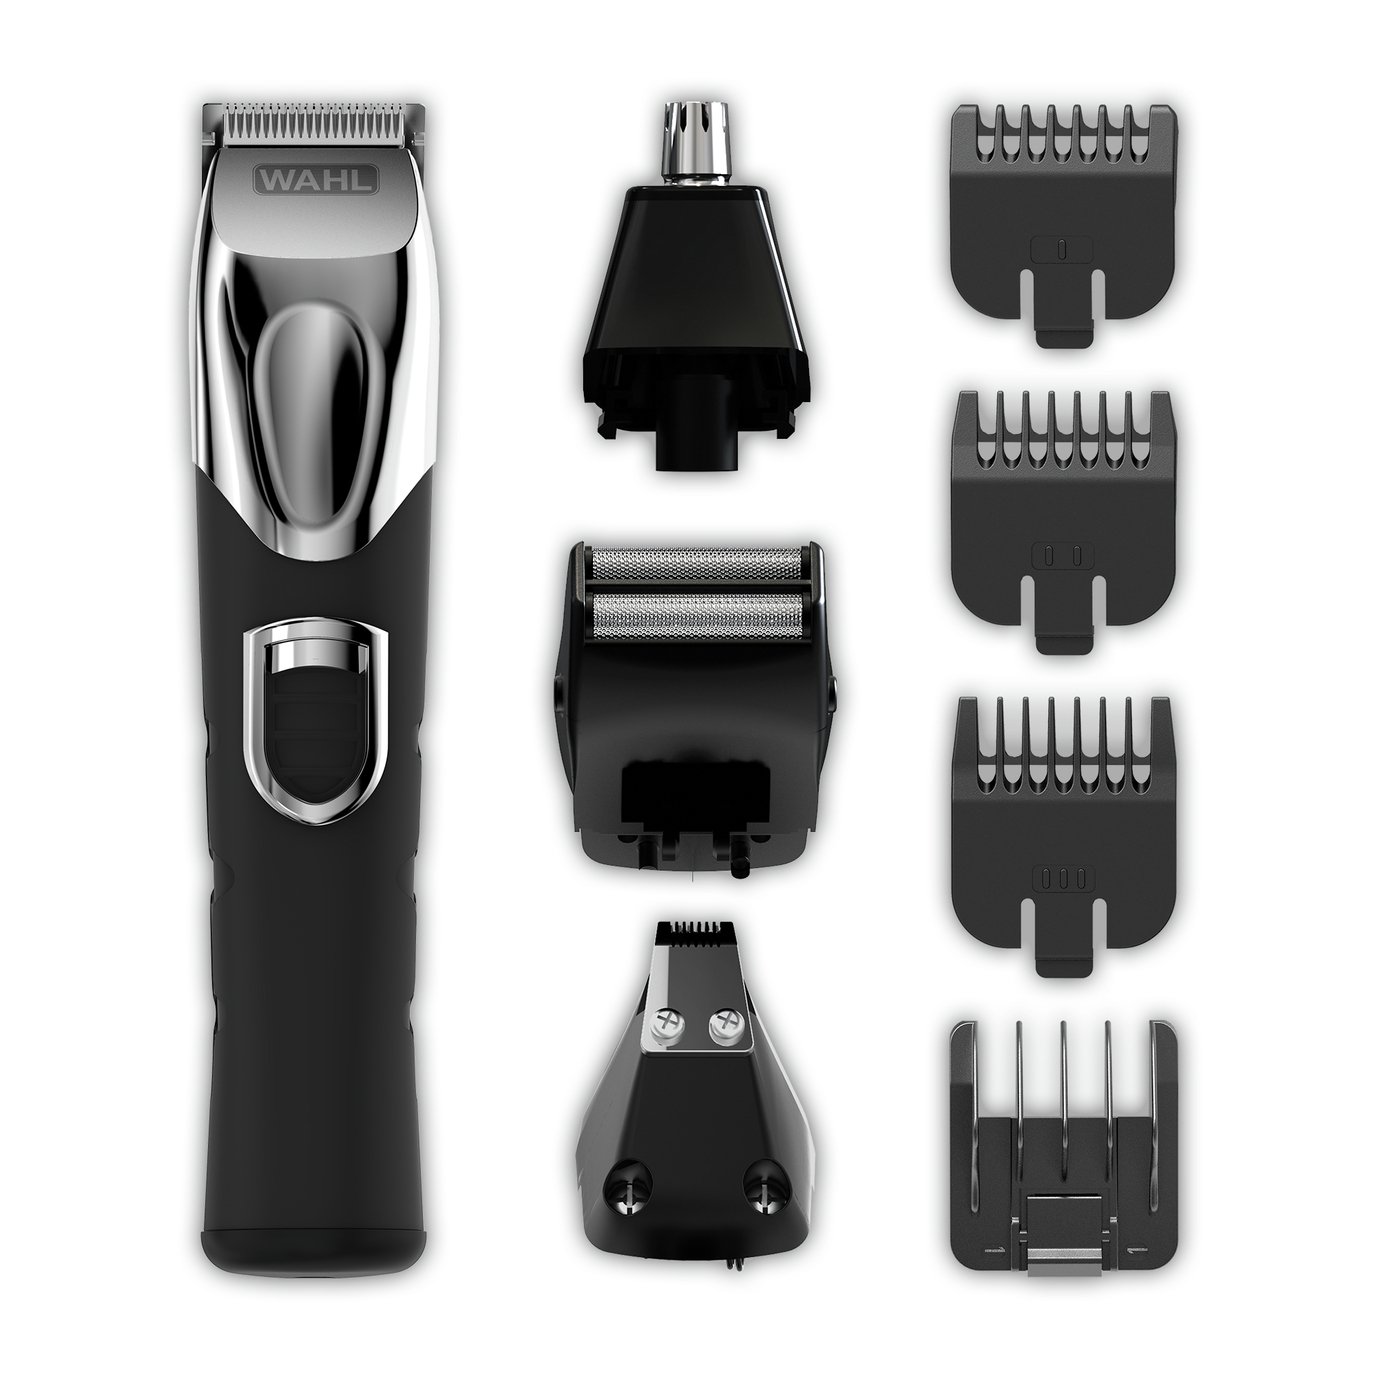 Wahl 4 in 1 Body Groomer and Hair Clipper Kit WM8050-800X